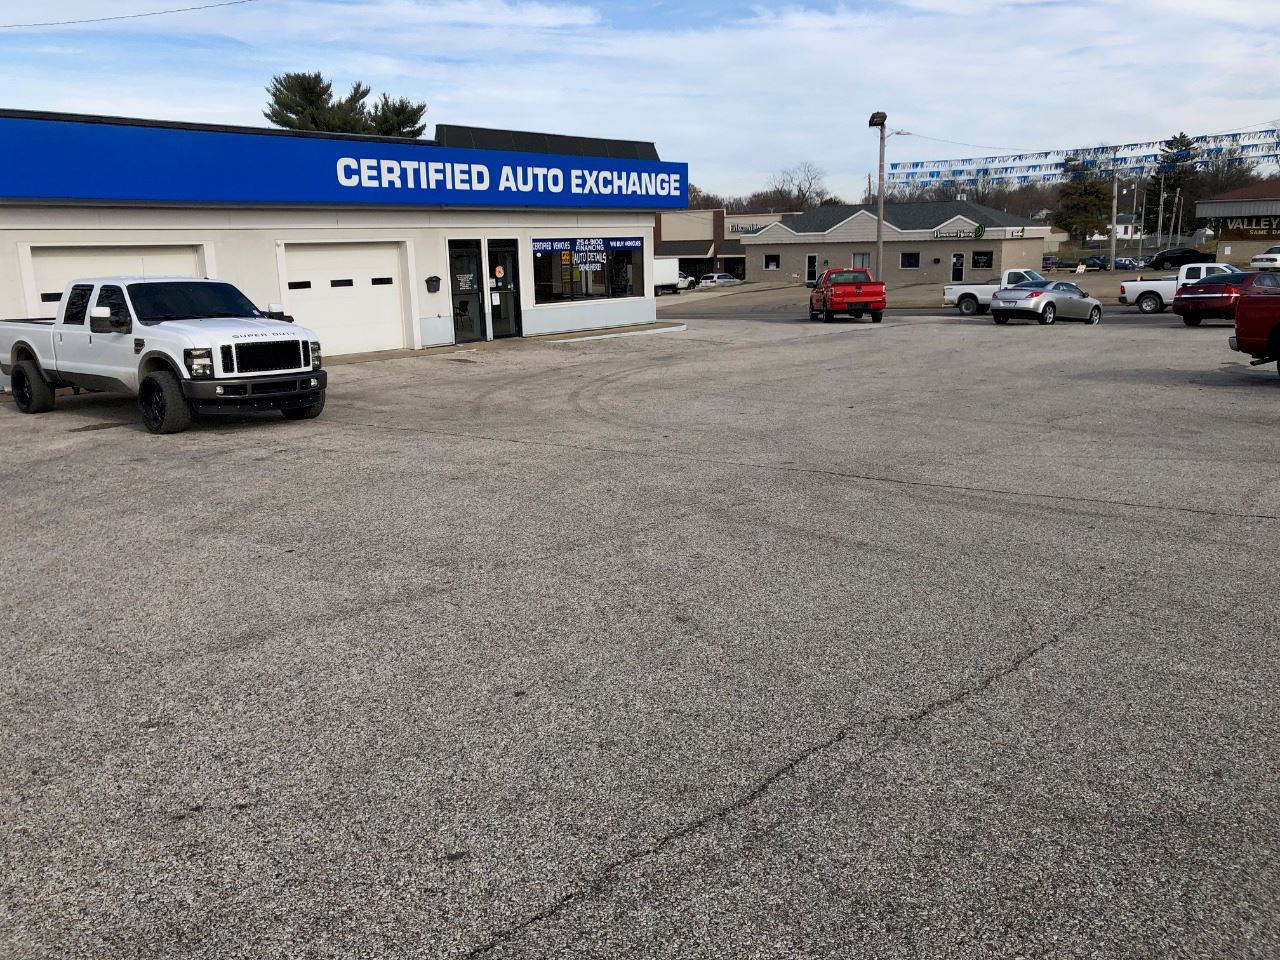 Perrys Certified Auto Exchange